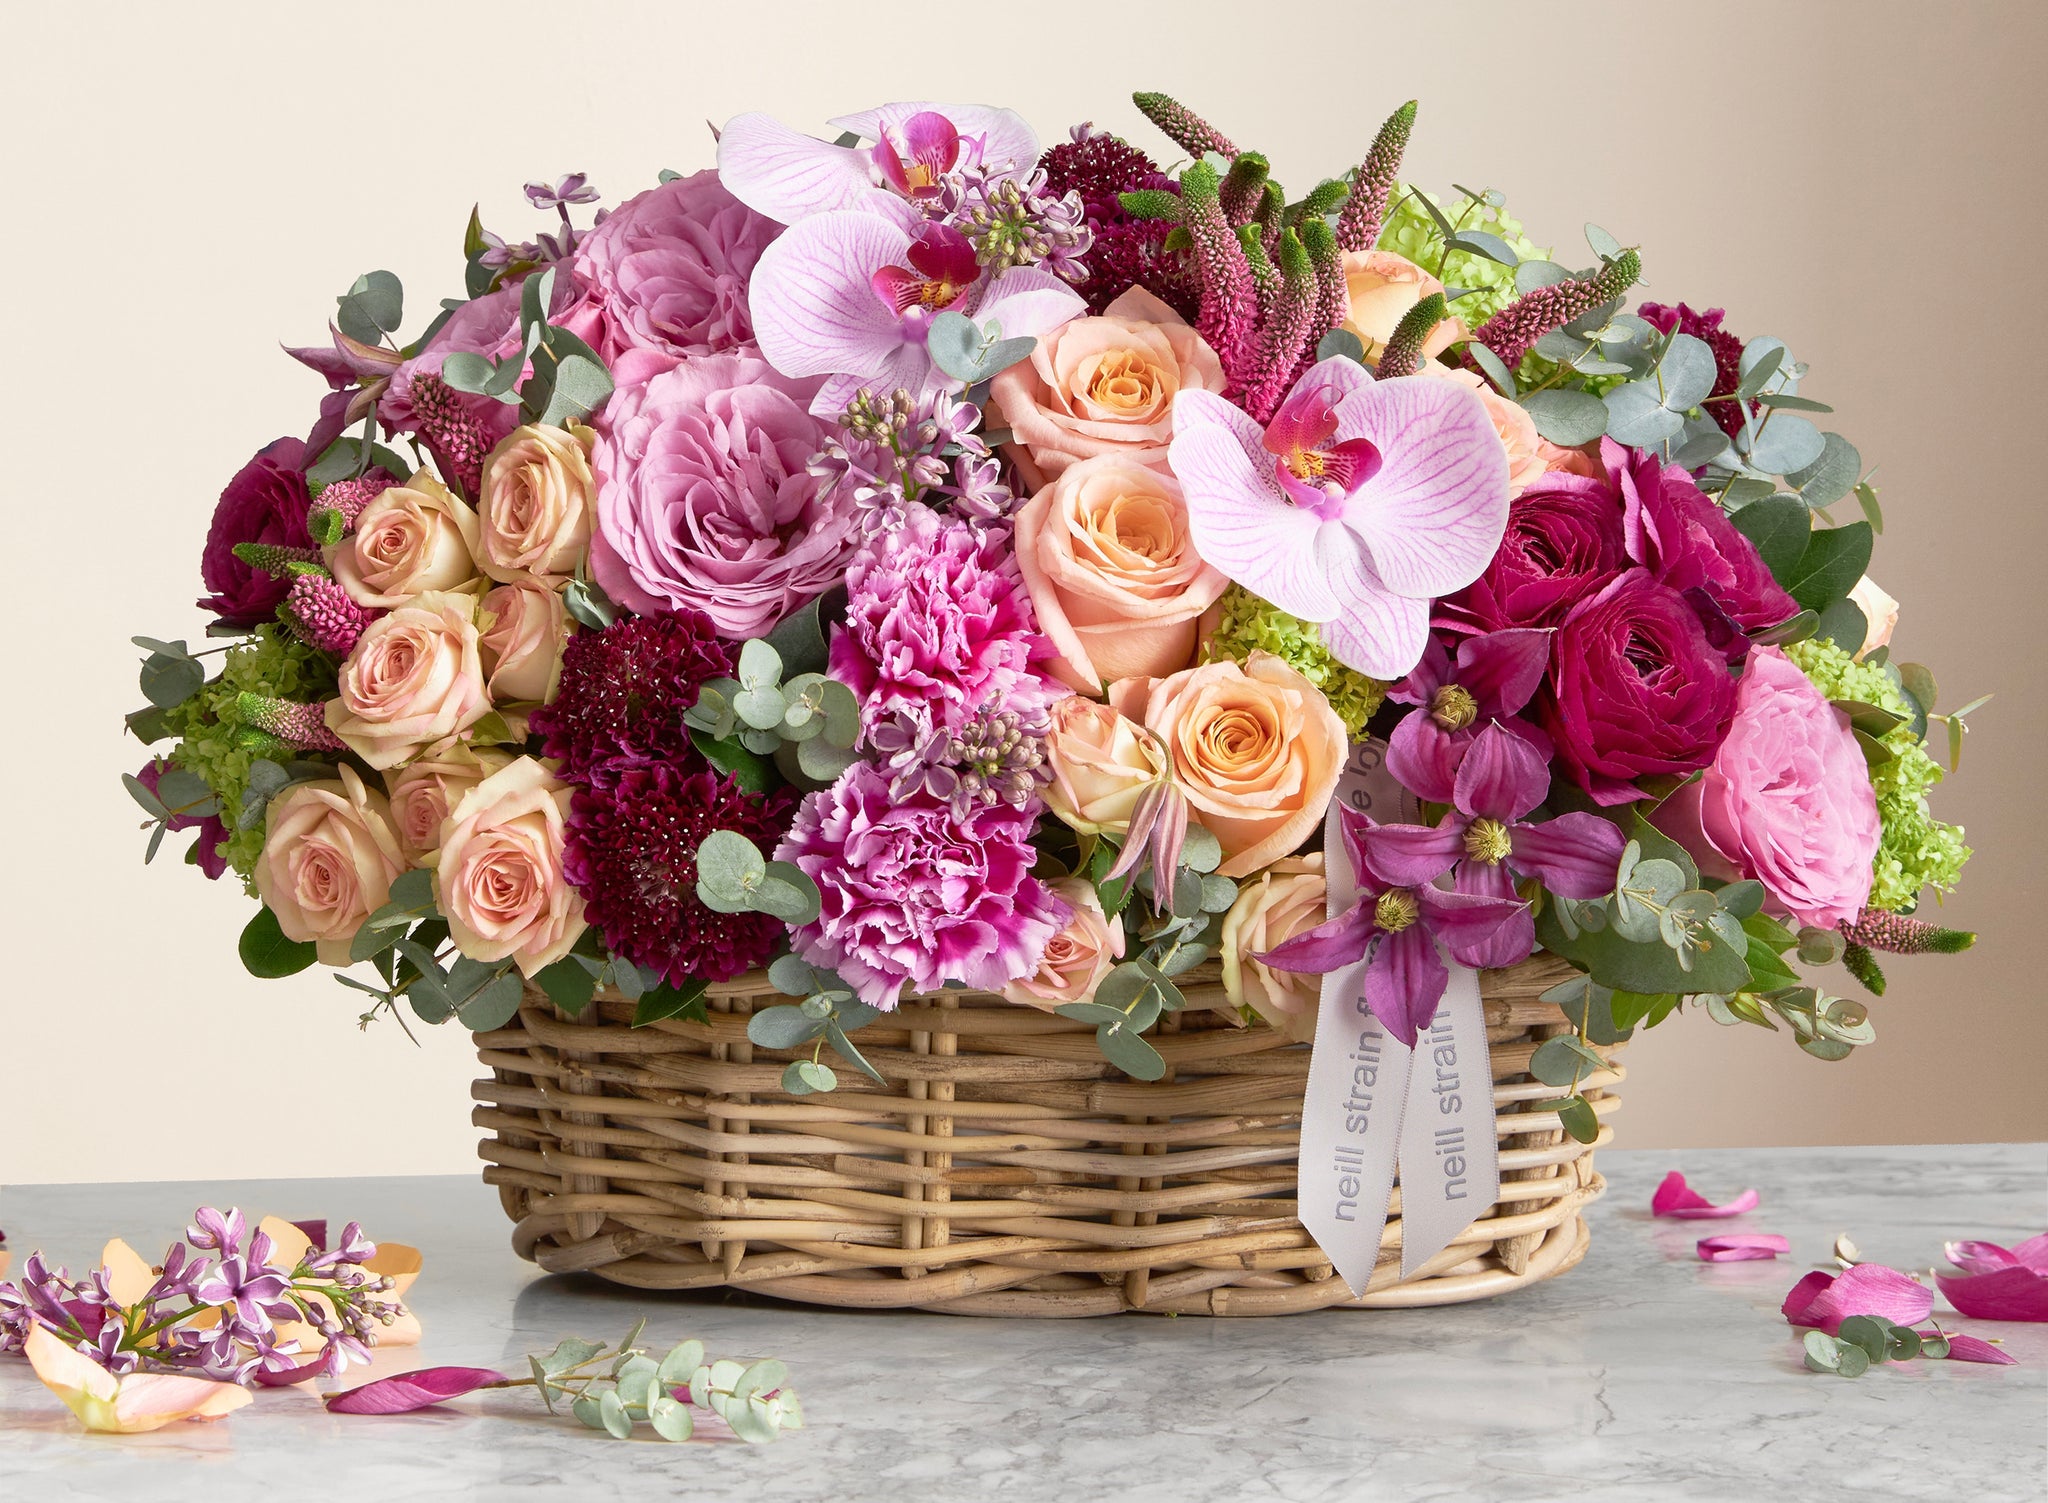 Neill Strain Floral Couture Mother's Day luxury flowers